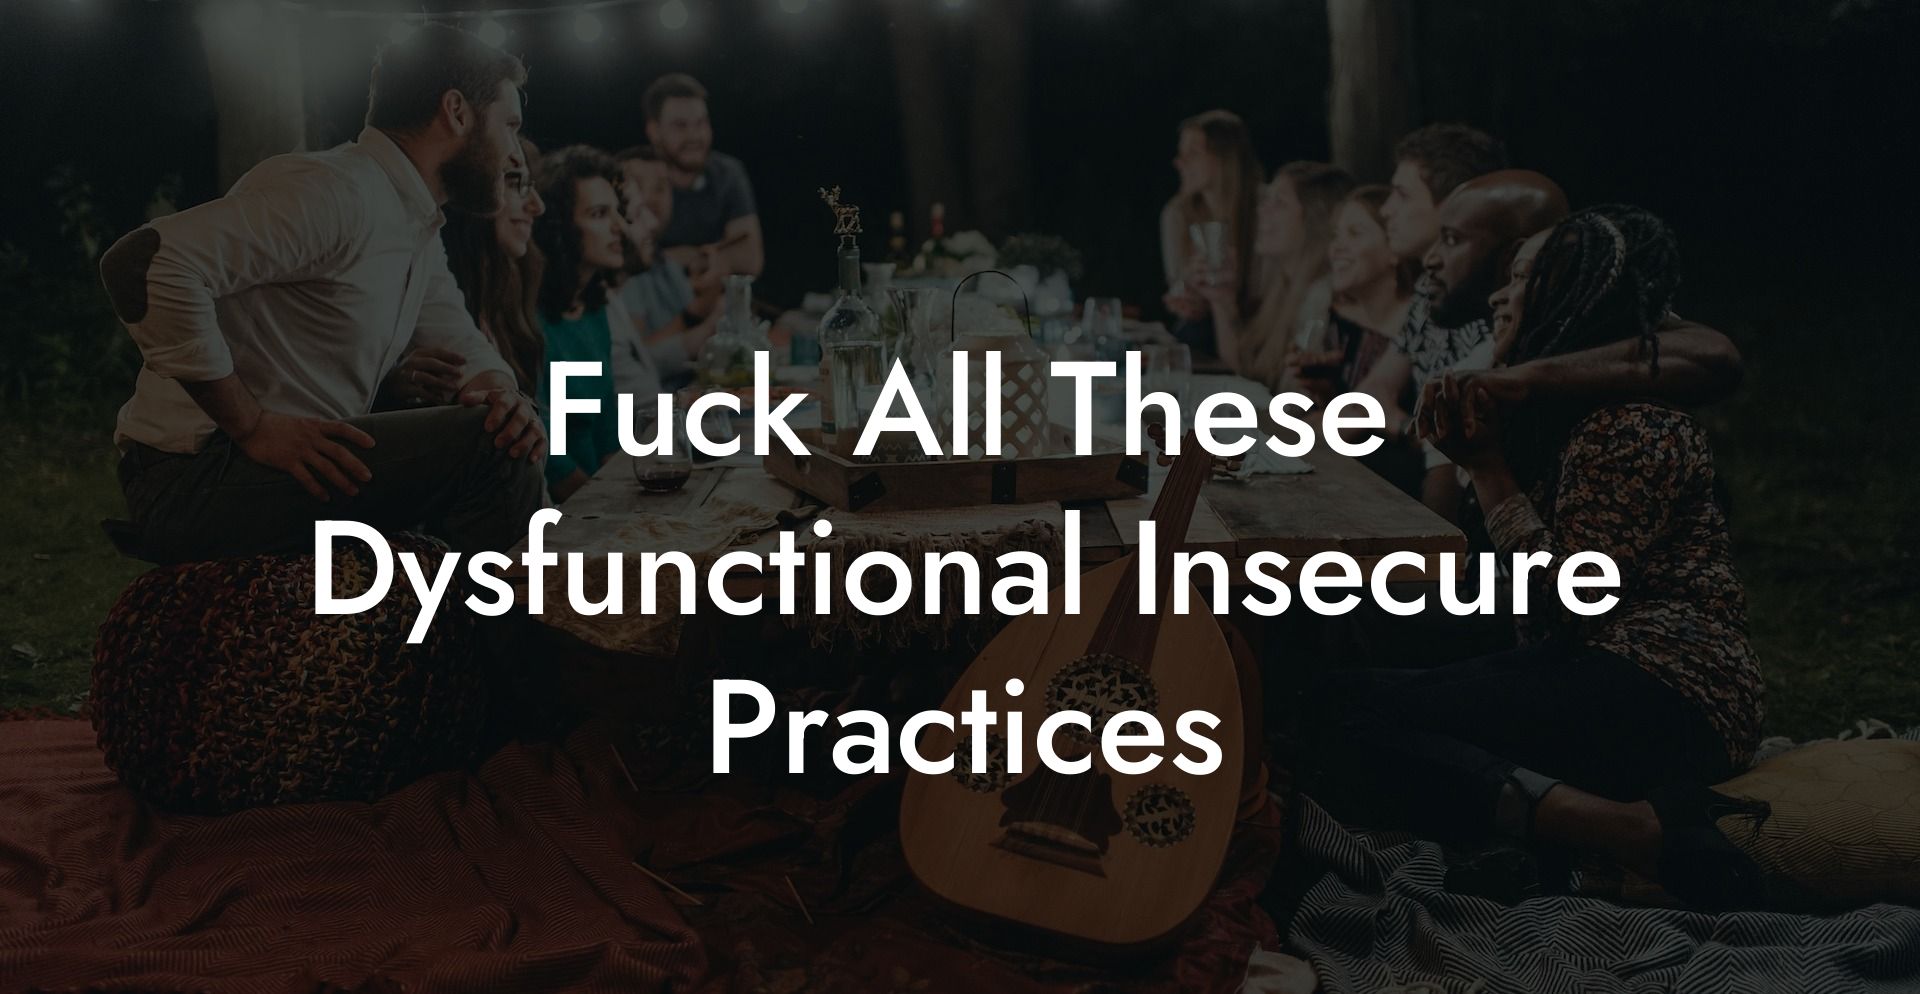 Fuck All These Dysfunctional Insecure Practices